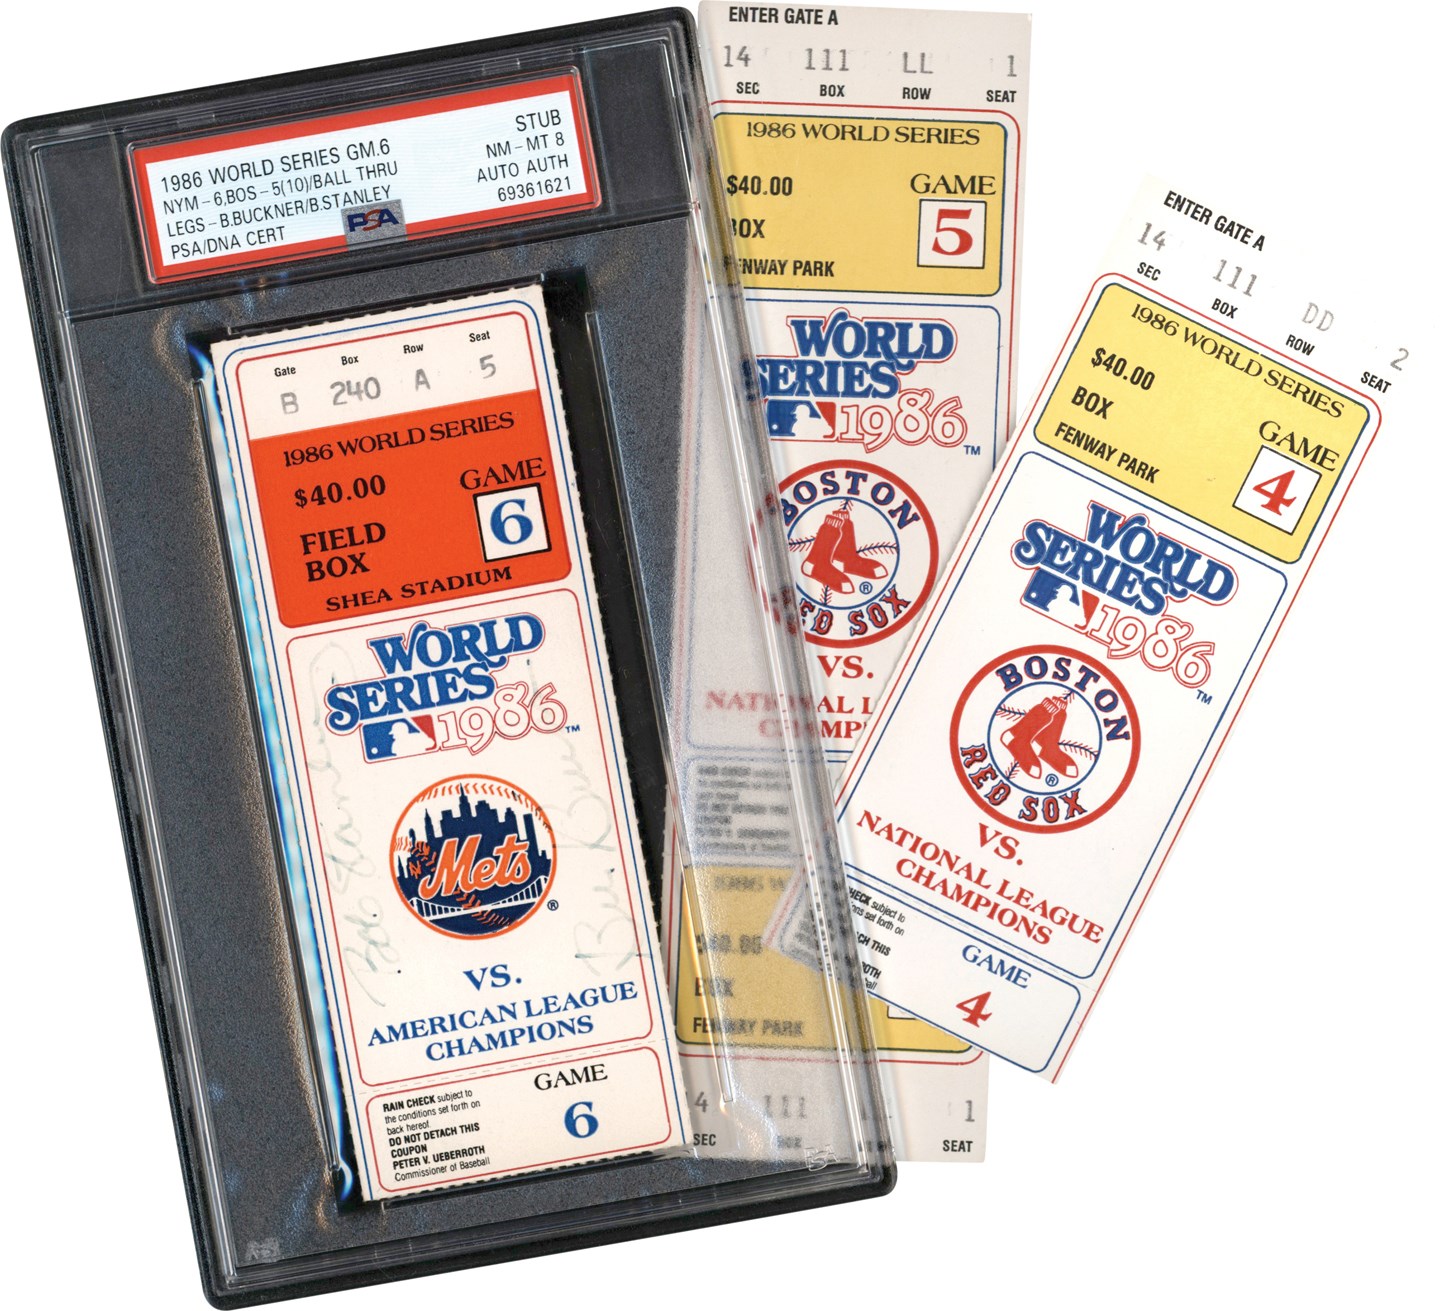 1986 World Series Game 6 Ticket Stub Signed by Bill Buckner and Bob Stanley Plus Game 4 and Game 5 Tickets